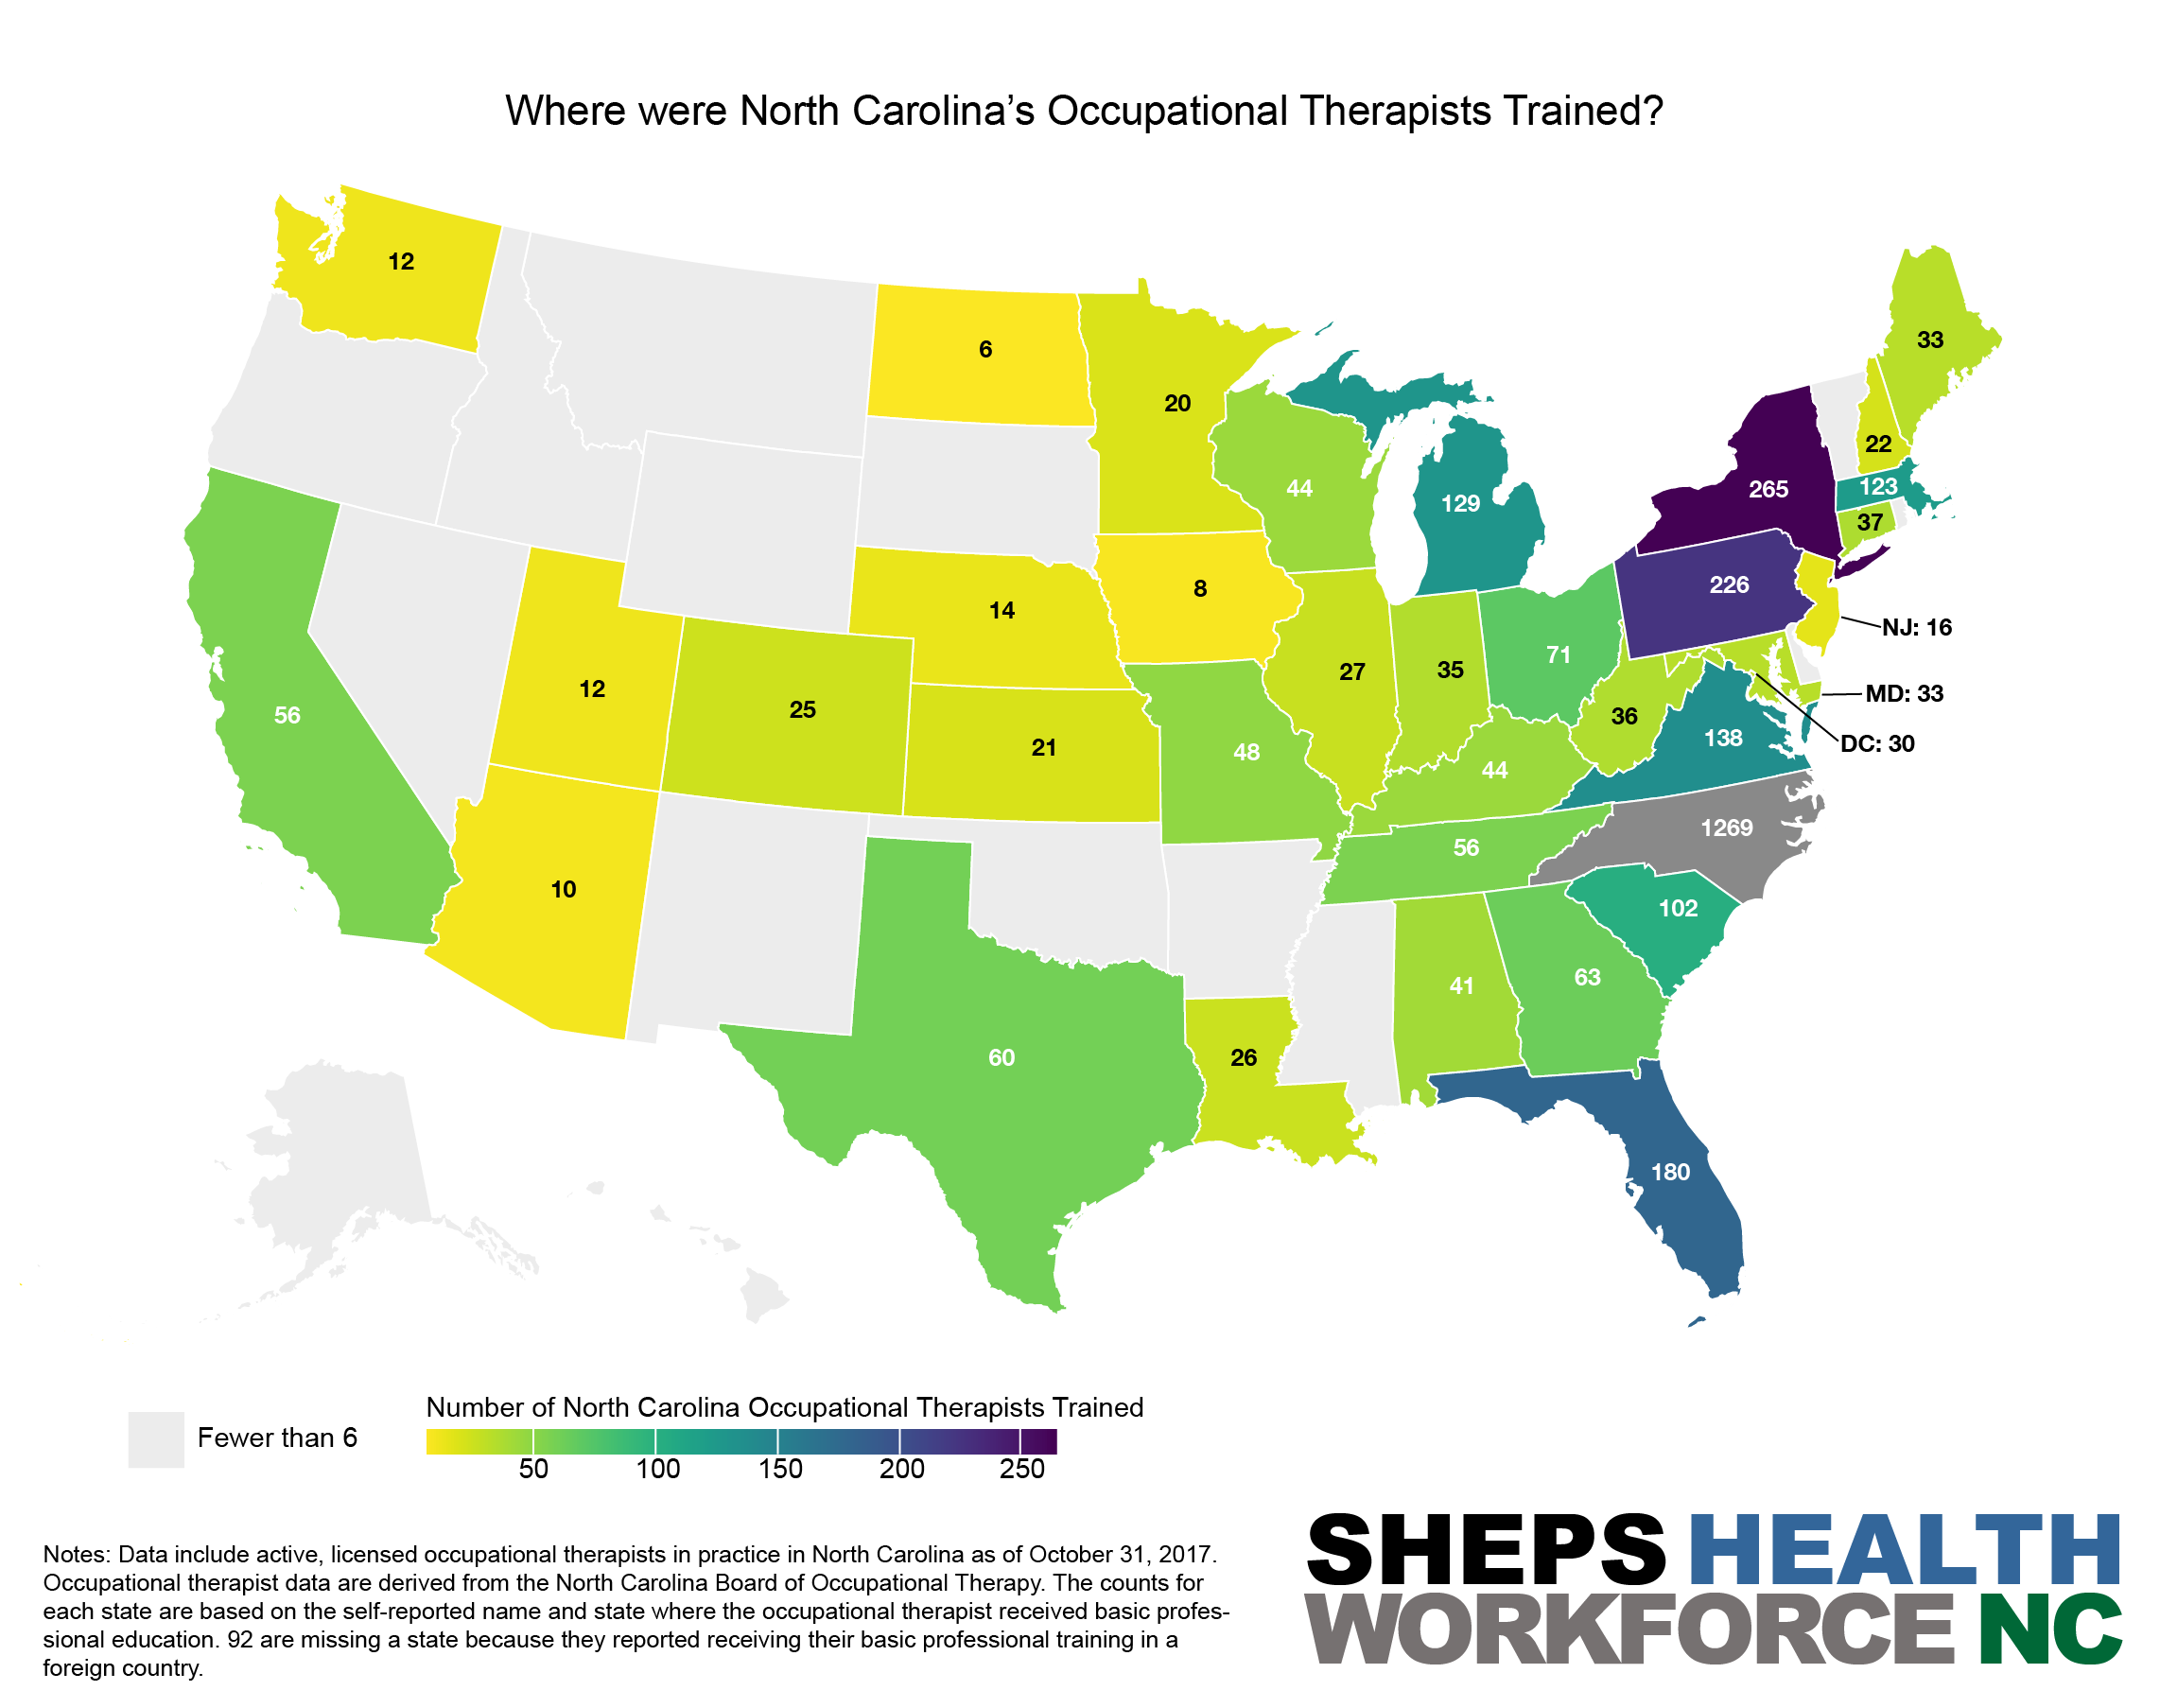 Map of US states showing where North Carolina's occupational therapists were trained.